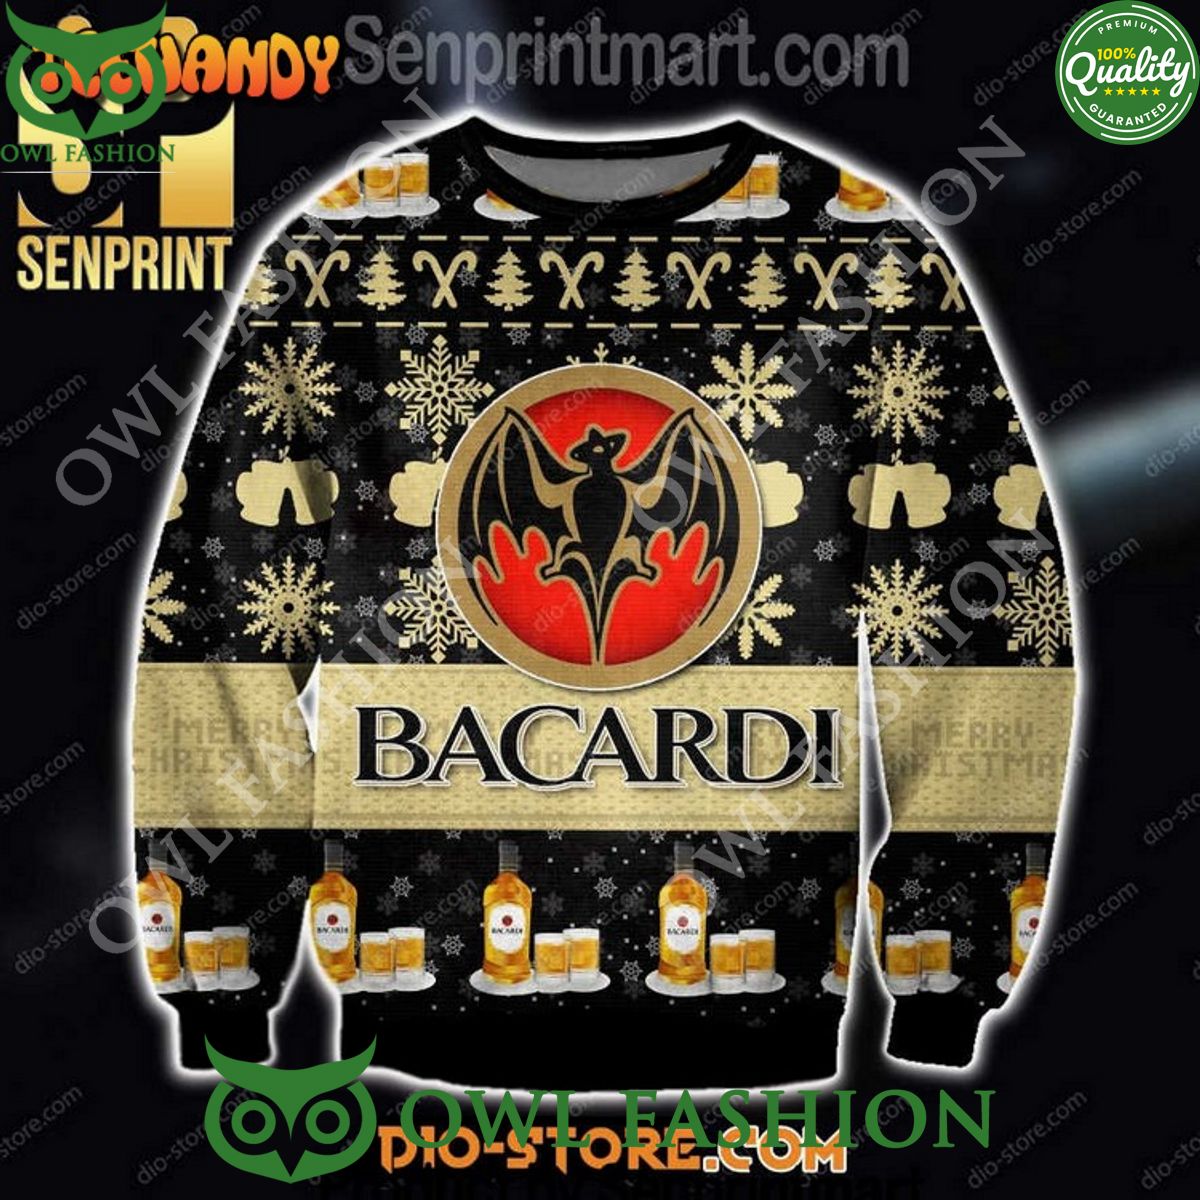 bacardi vacation time wool blend ugly christmas sweater 1 uijy2.jpg